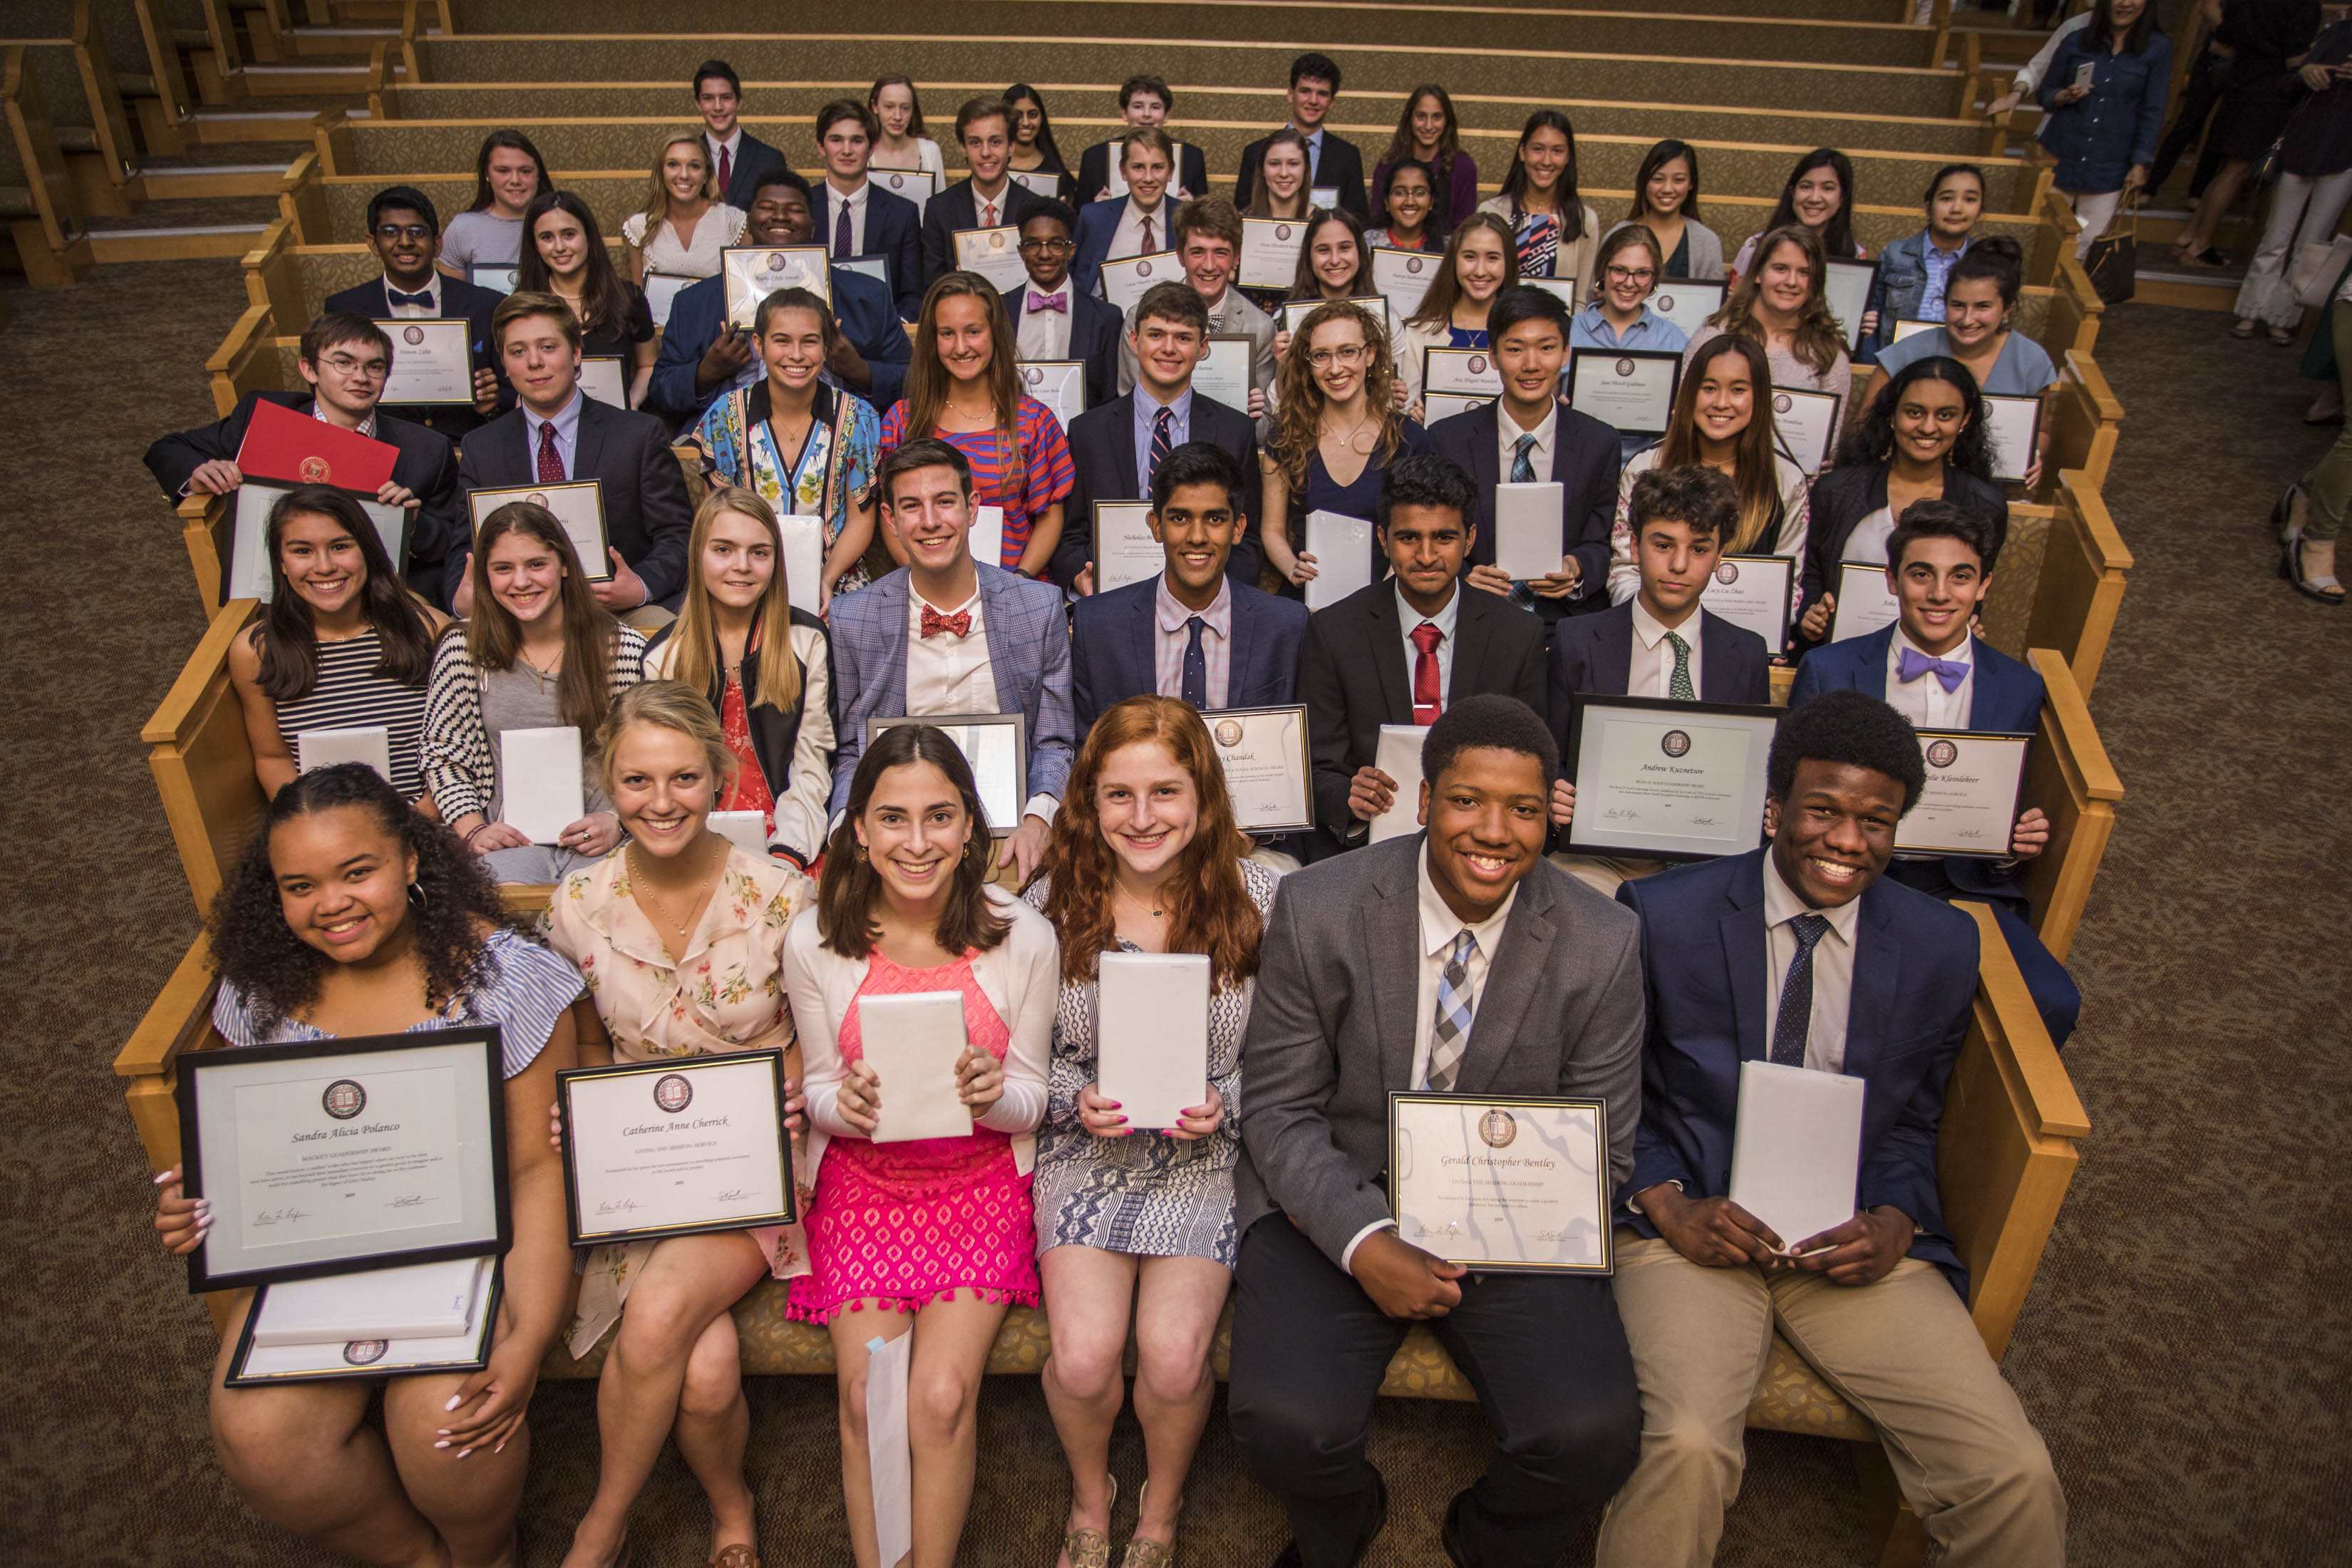 MICDS Celebrates Upper School student standouts during Prize Day